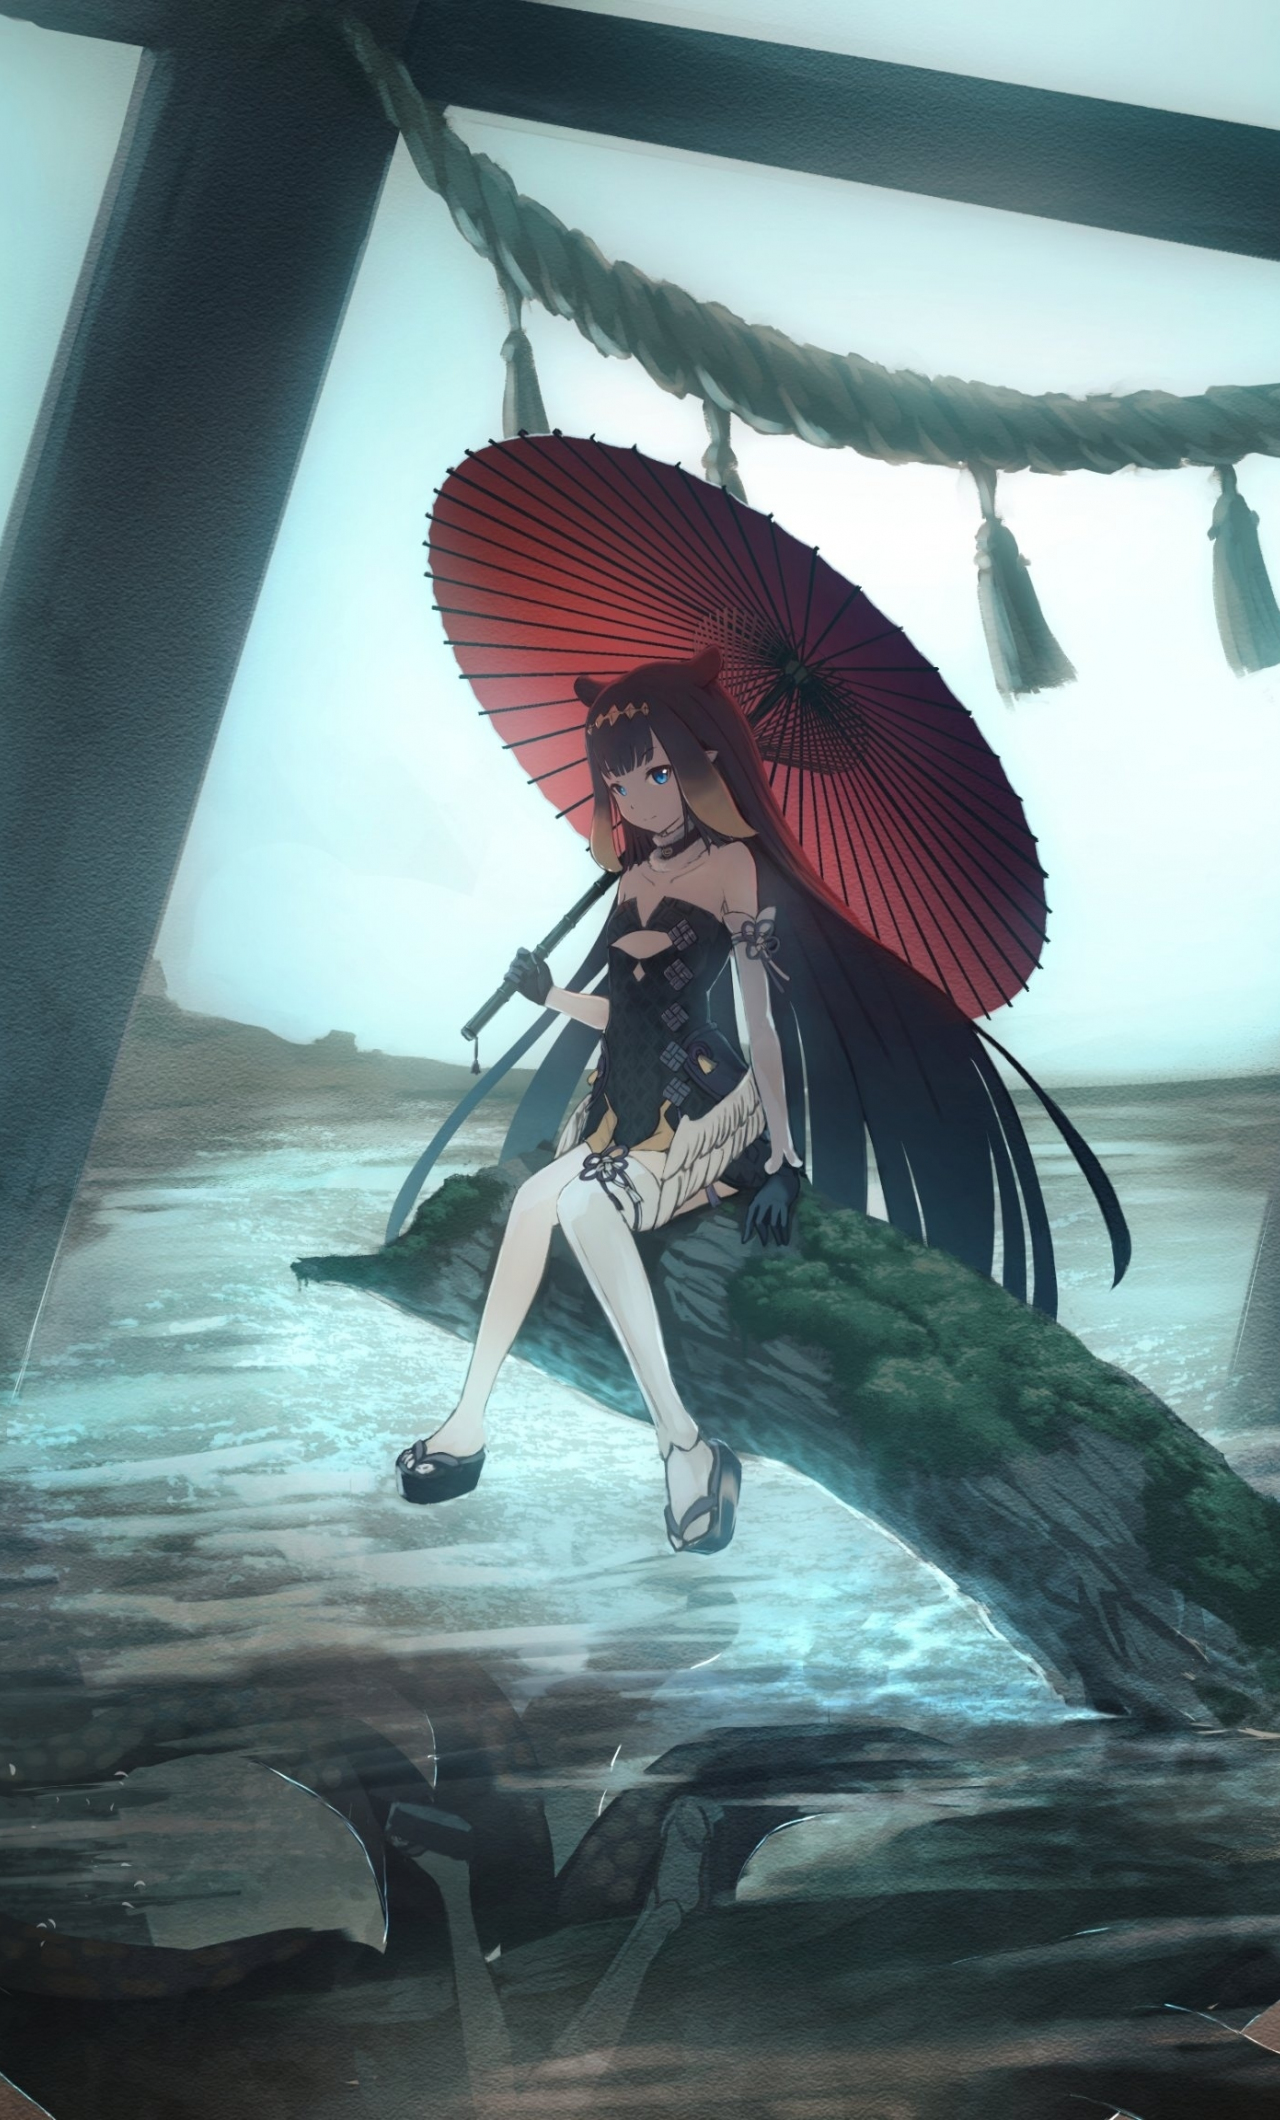 Download wallpaper 1280x2120 alone, anime girl with umbrella, original,  iphone 6 plus, 1280x2120 hd background, 26237